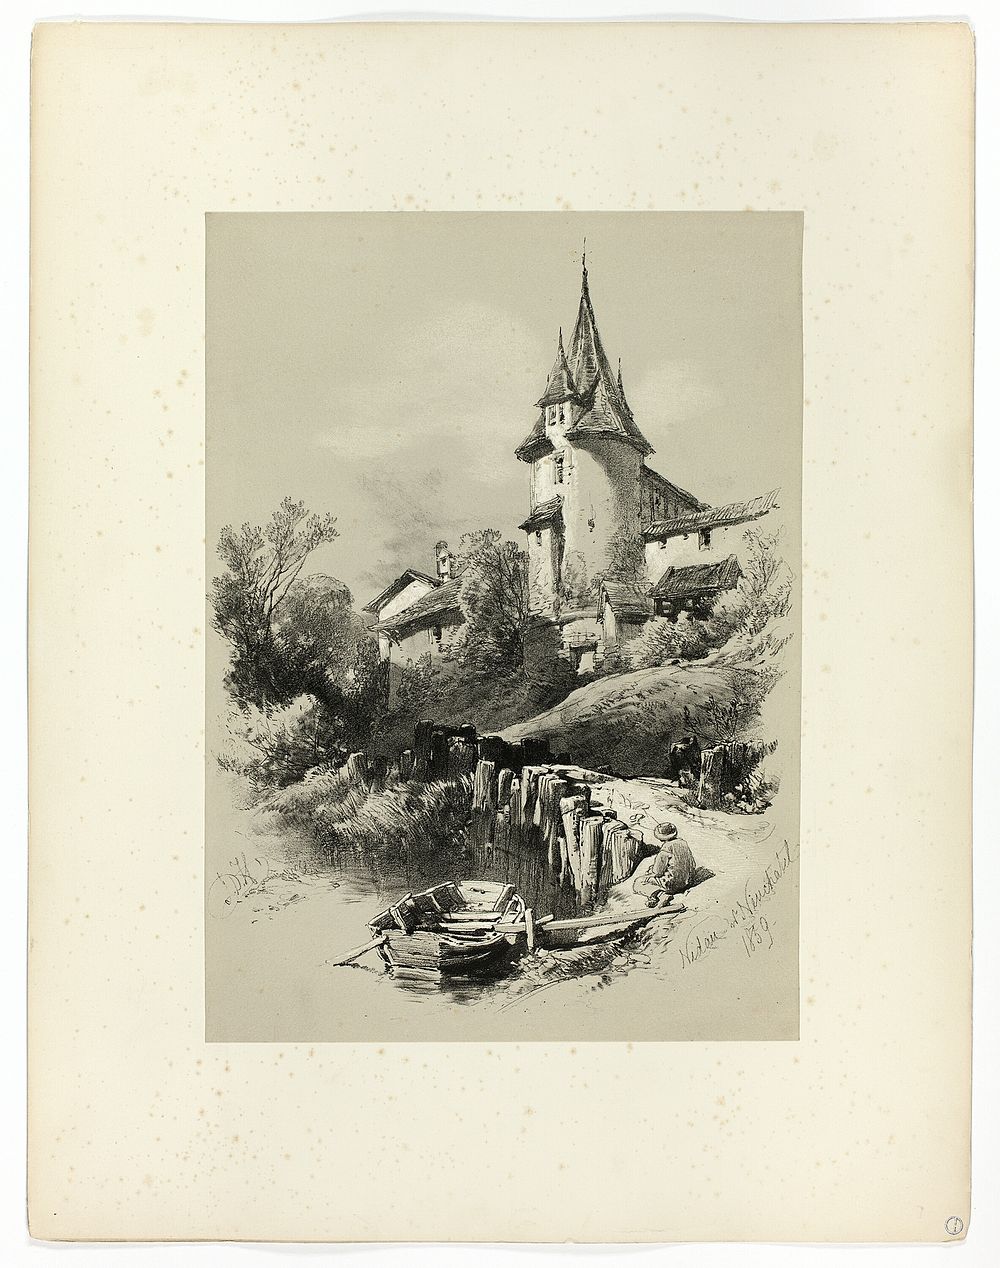 Nidan W. Neuchatel, from Picturesque Selections by James Duffield Harding